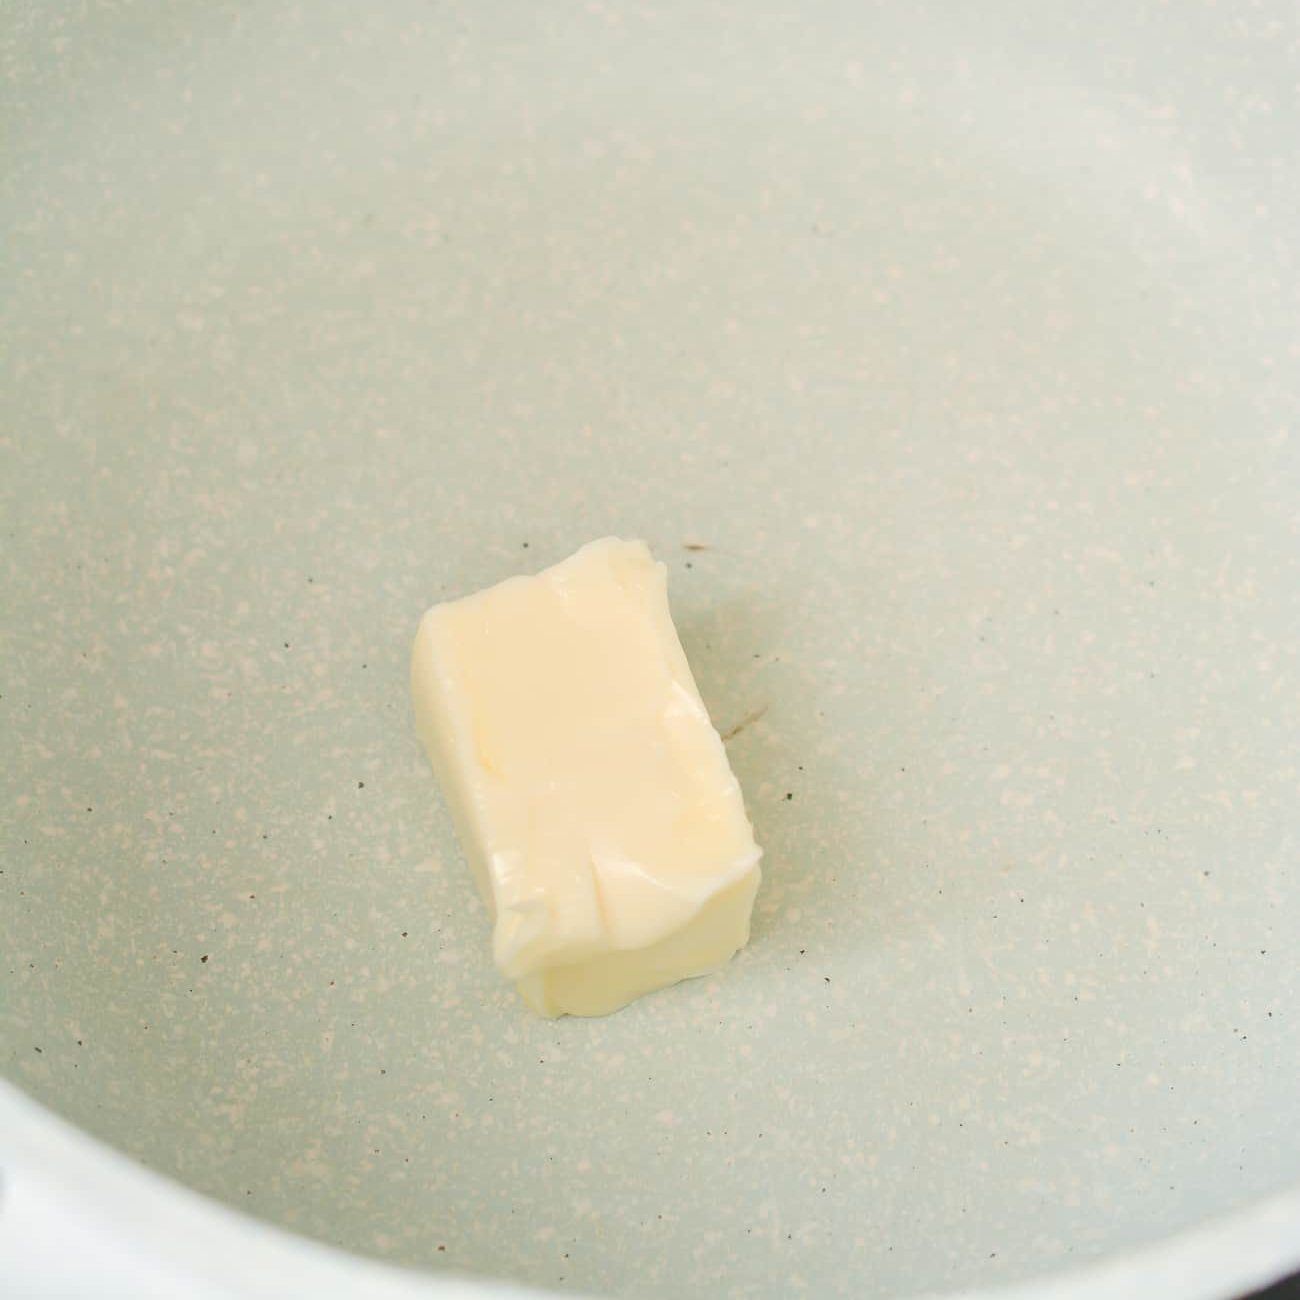 Place 3 tbsp of butter in a saucepan over medium-low heat on the stove.